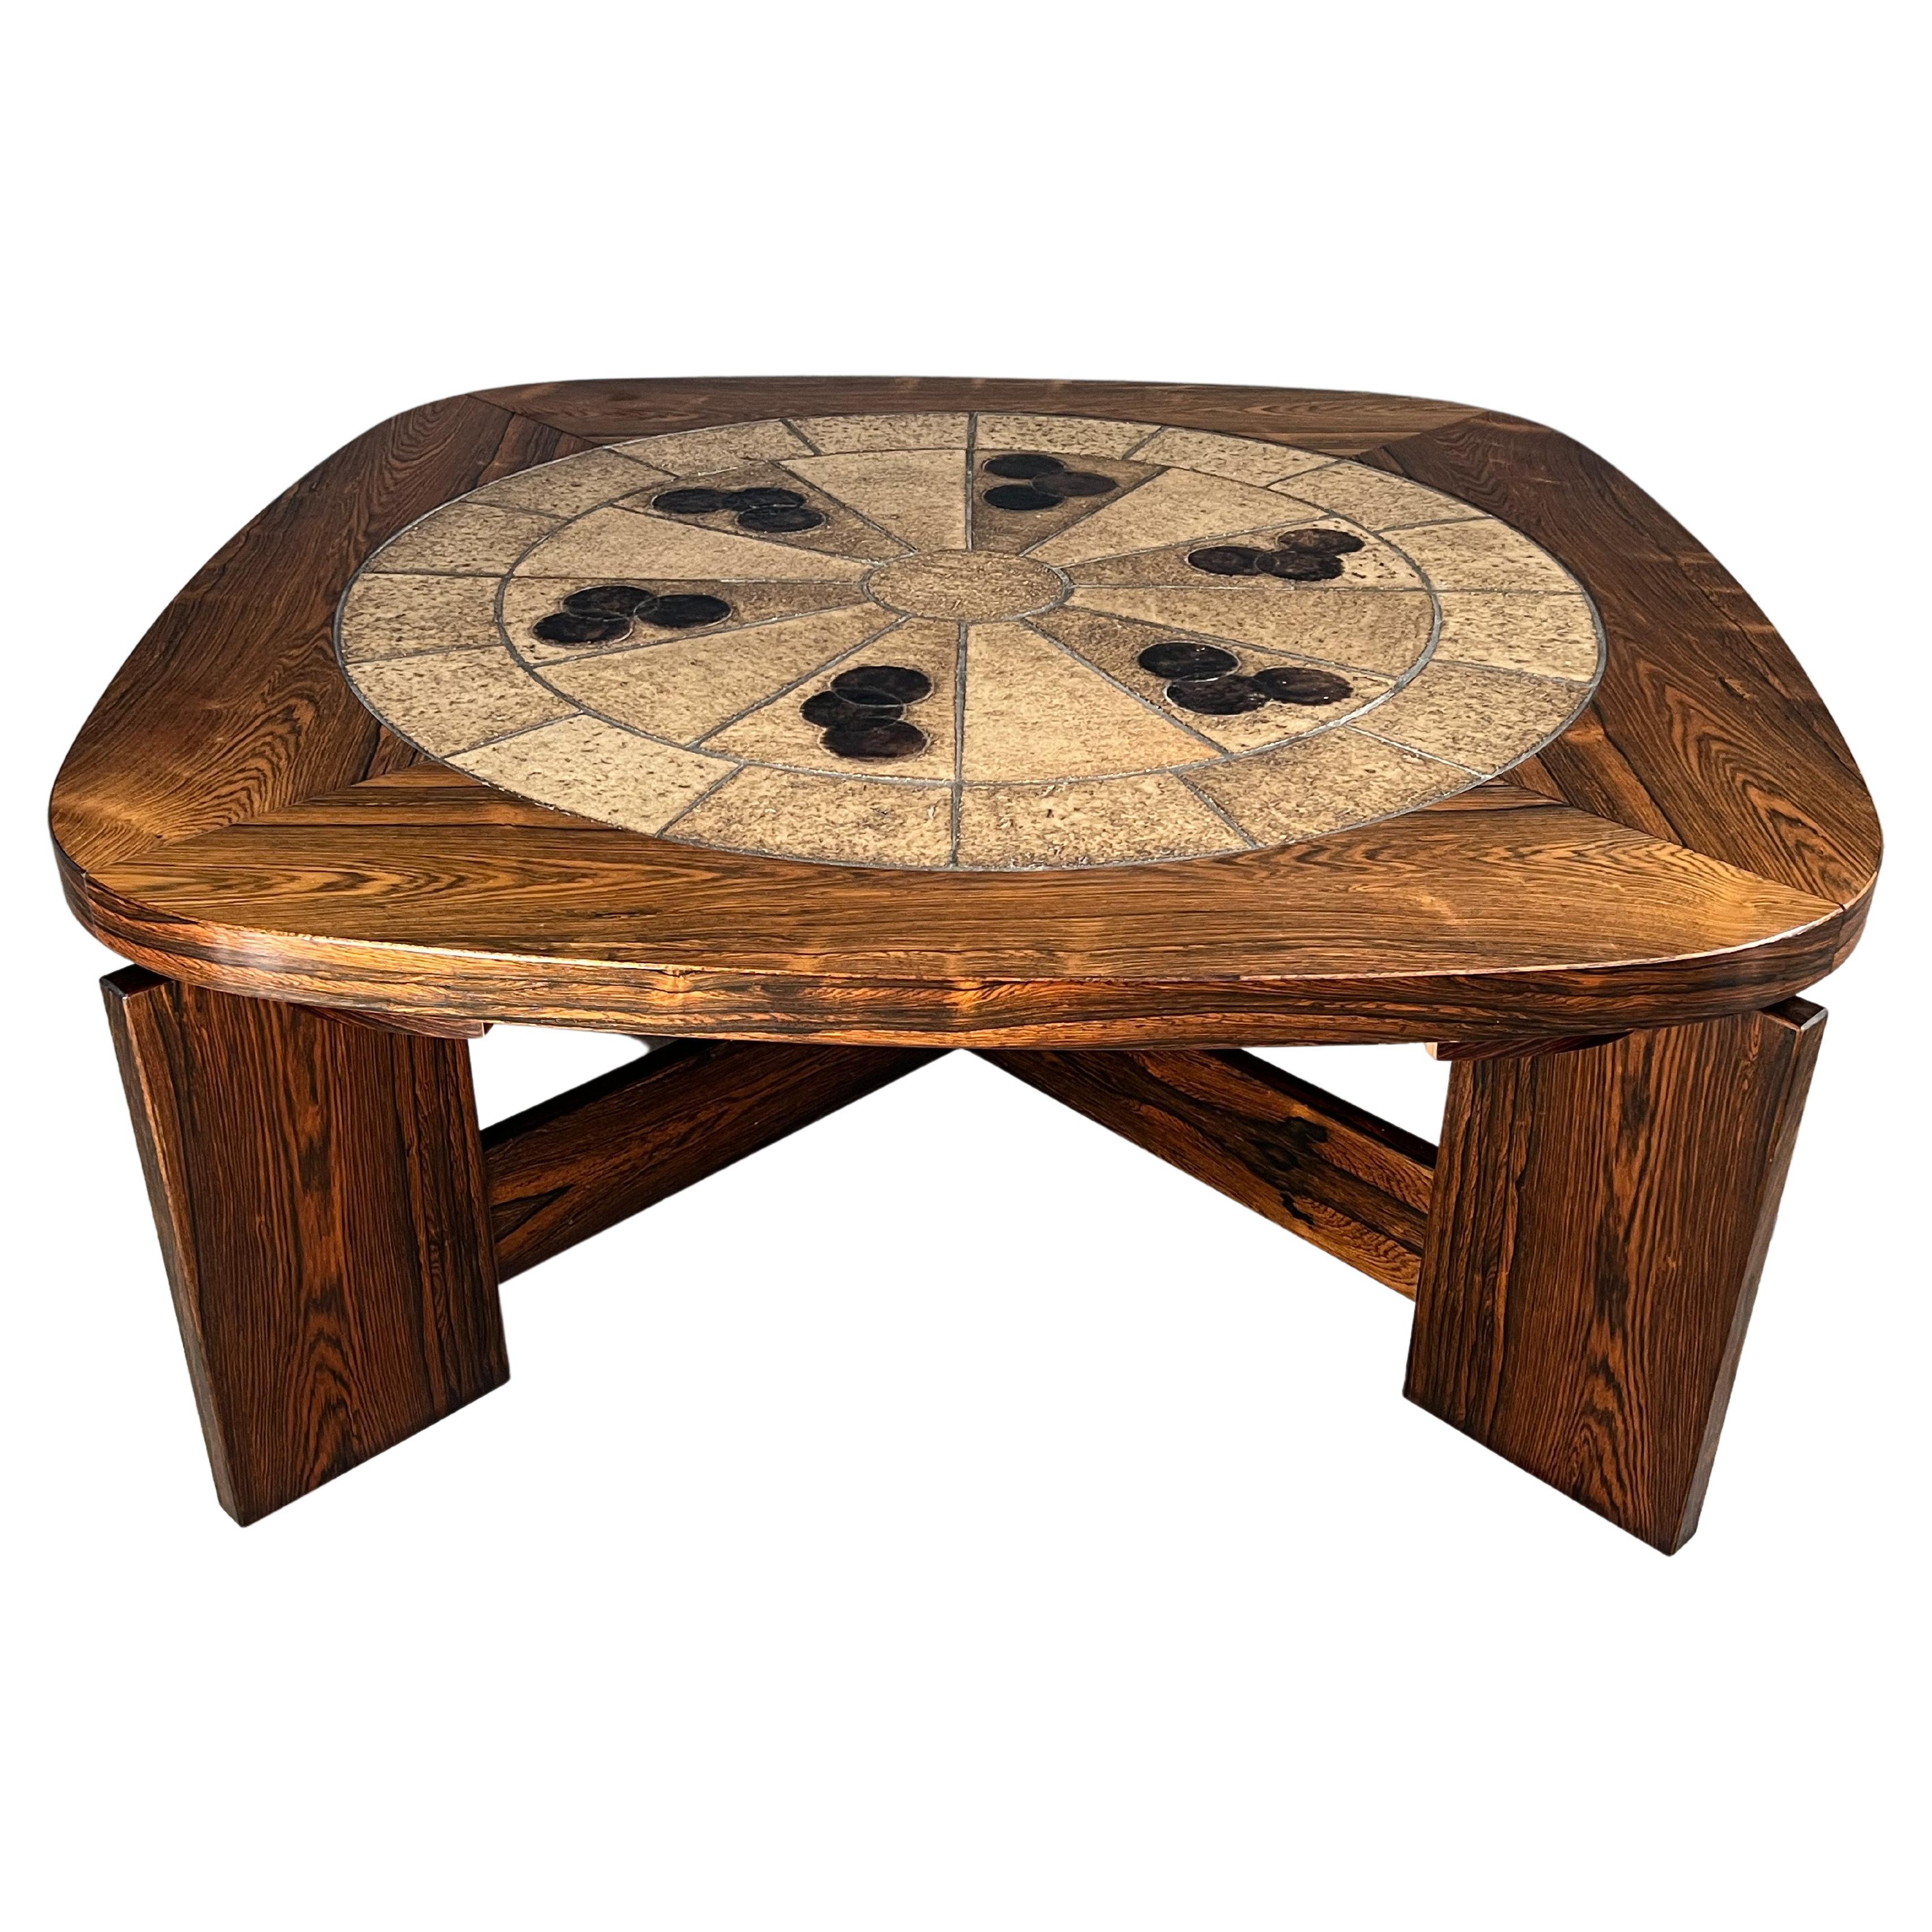 Brazilian Rosewood and Tile Coffee Table Attributed to Tue Poulsen